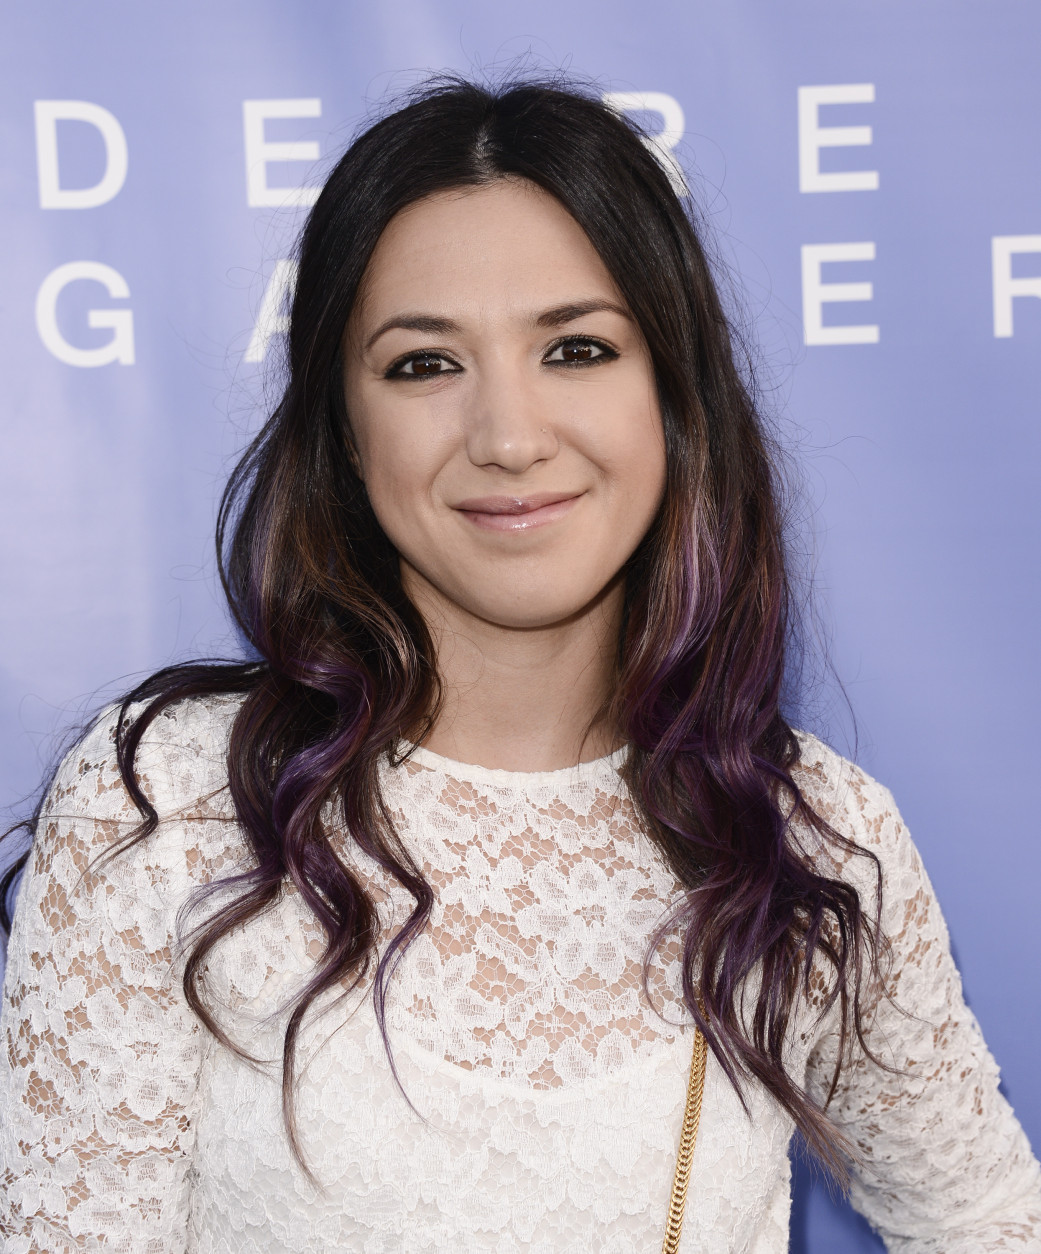 Singer Michelle Branch attends the grand opening of De Re Gallery on Thursday, May 15, 2014 in West Hollywood, Calif. (Photo by Dan Steinberg/Invision/AP Images)